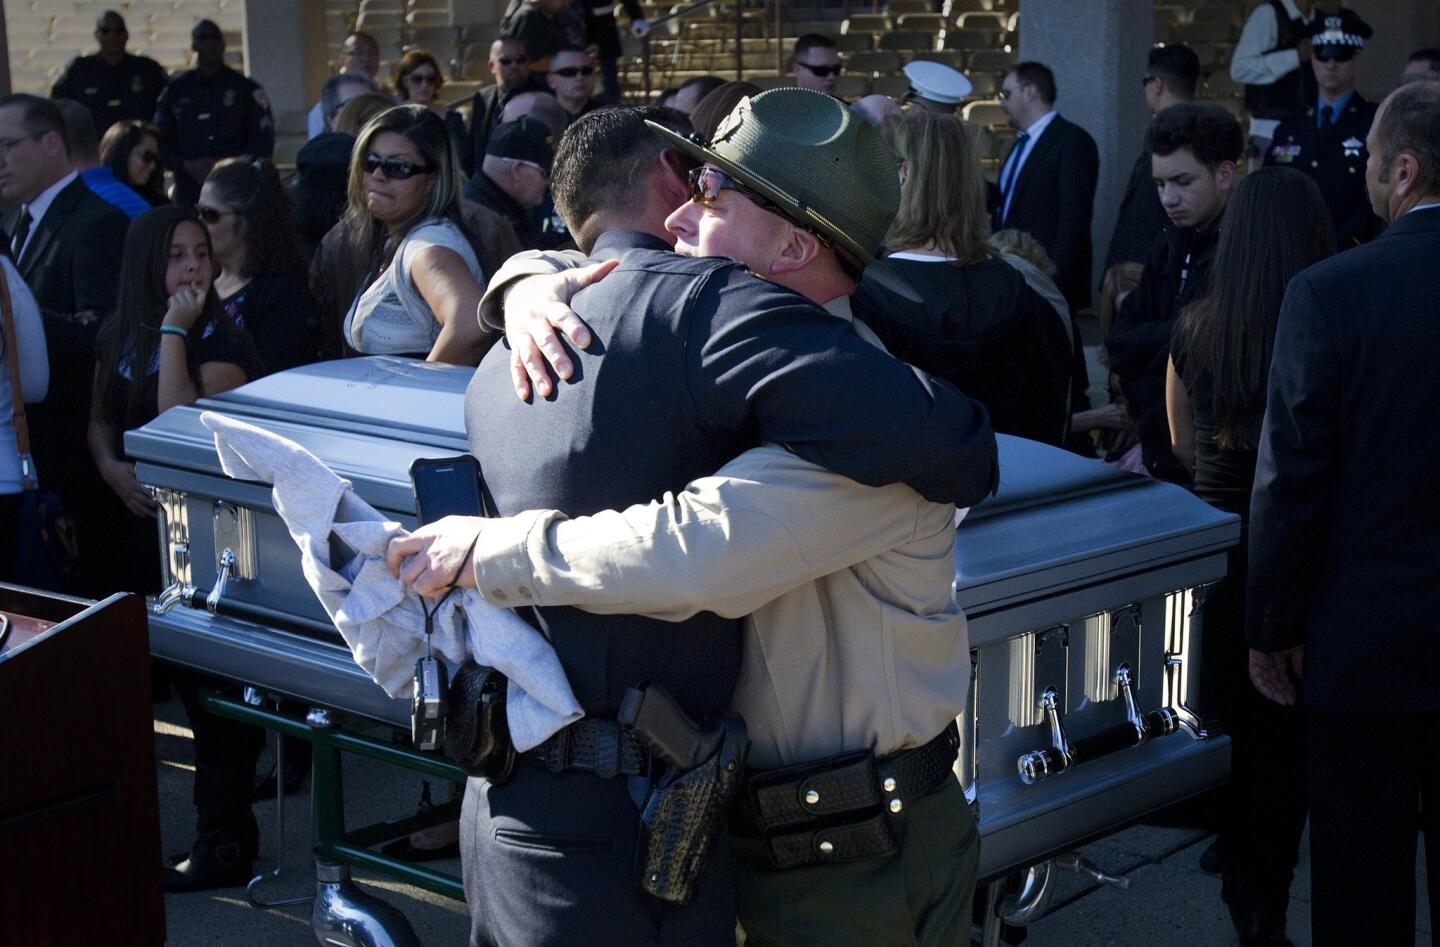 Law enforcement officers embrace at the casket of slain Riverside Police Officer Michael Crain after a memorial service at Riverside National Cemetery.